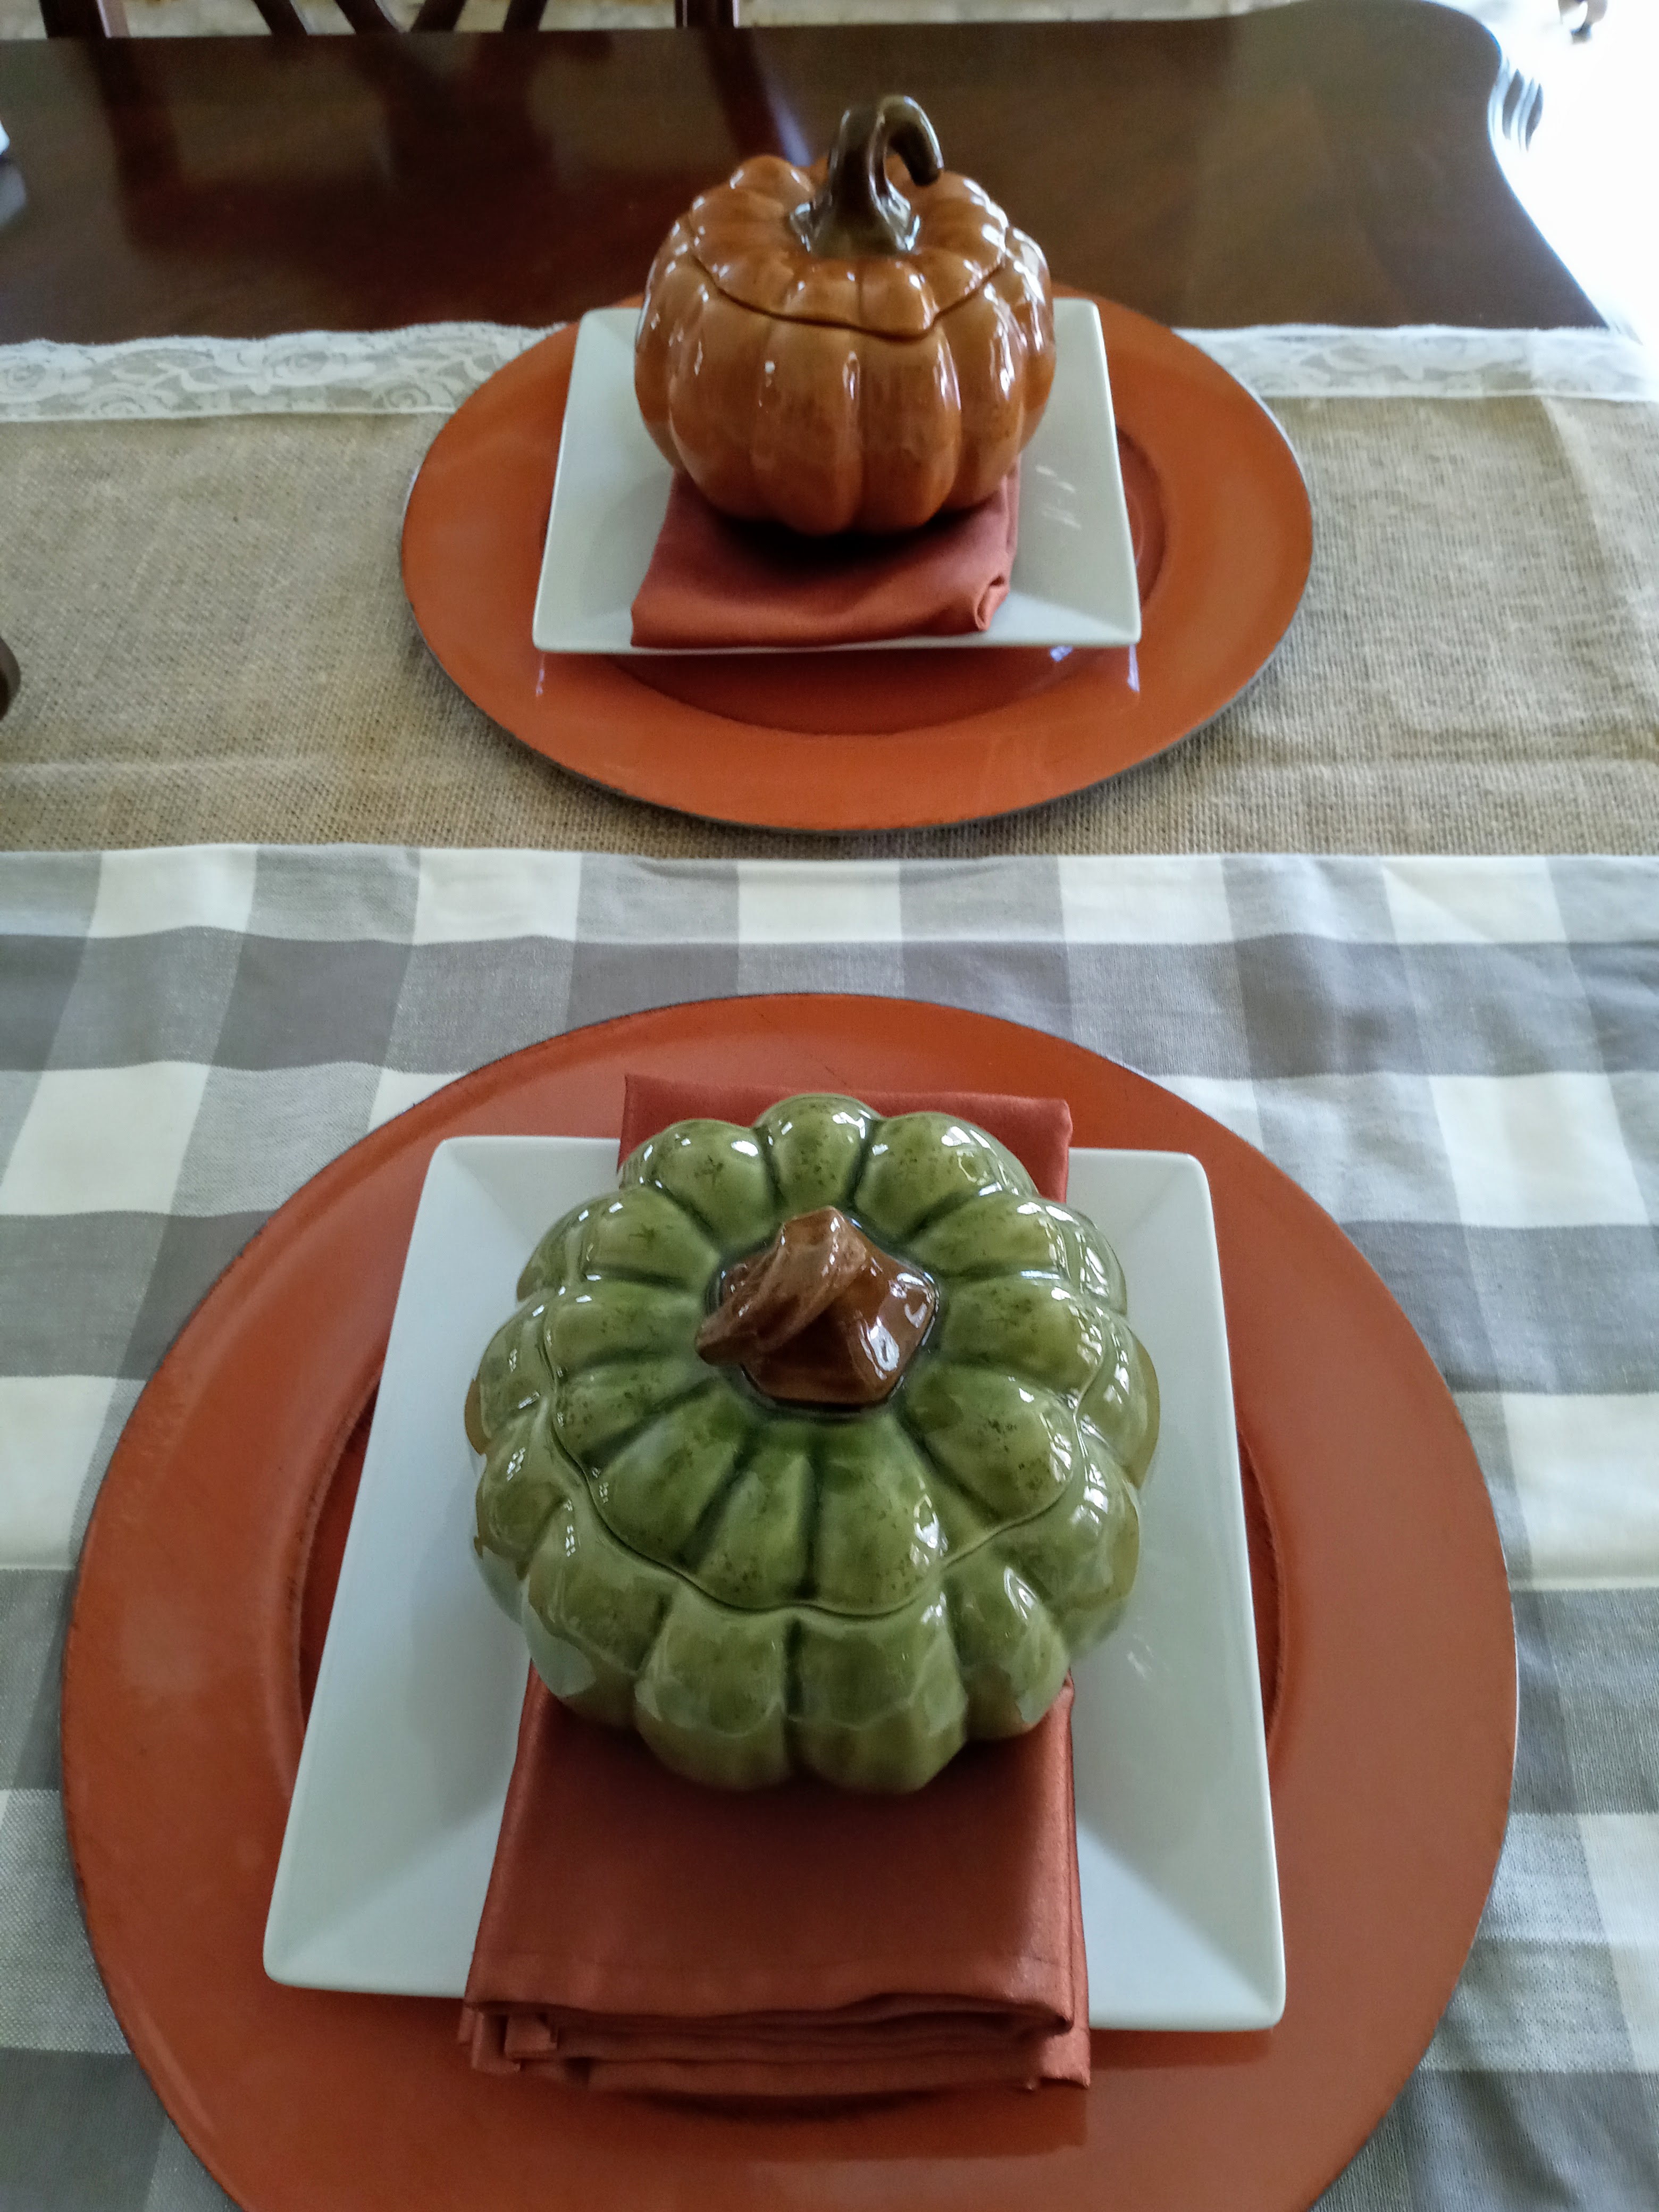 Thanks giving plate setting with square plates and pumpkinn